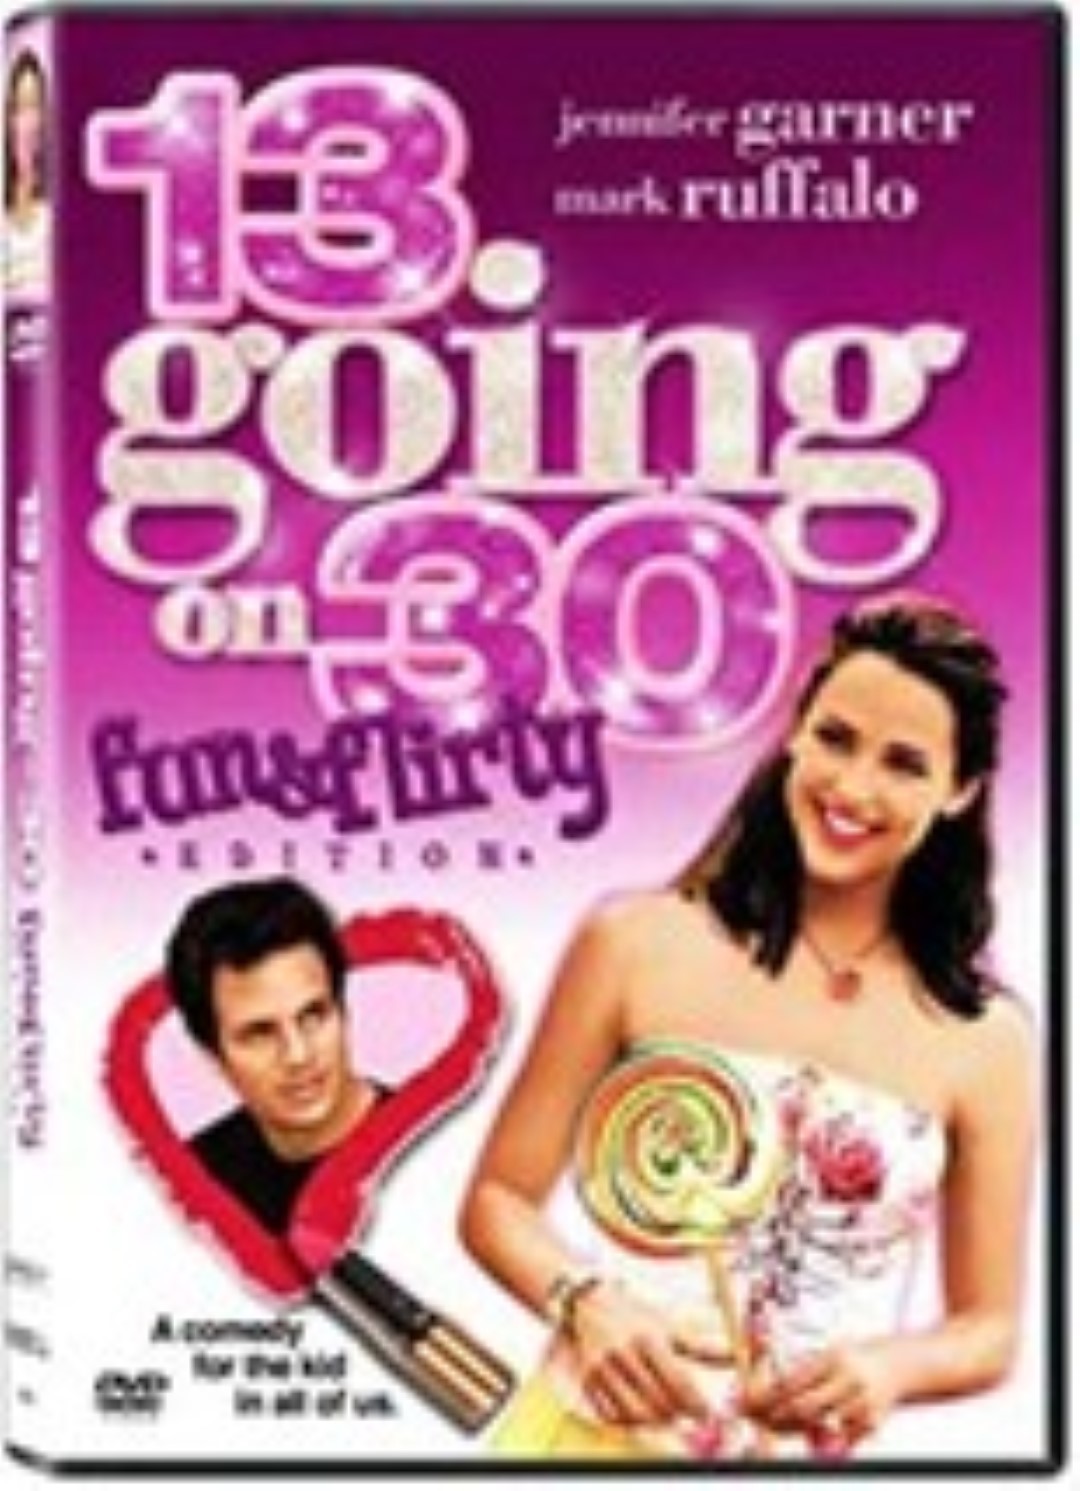 13 going on 30 fun and flirty edition  large 